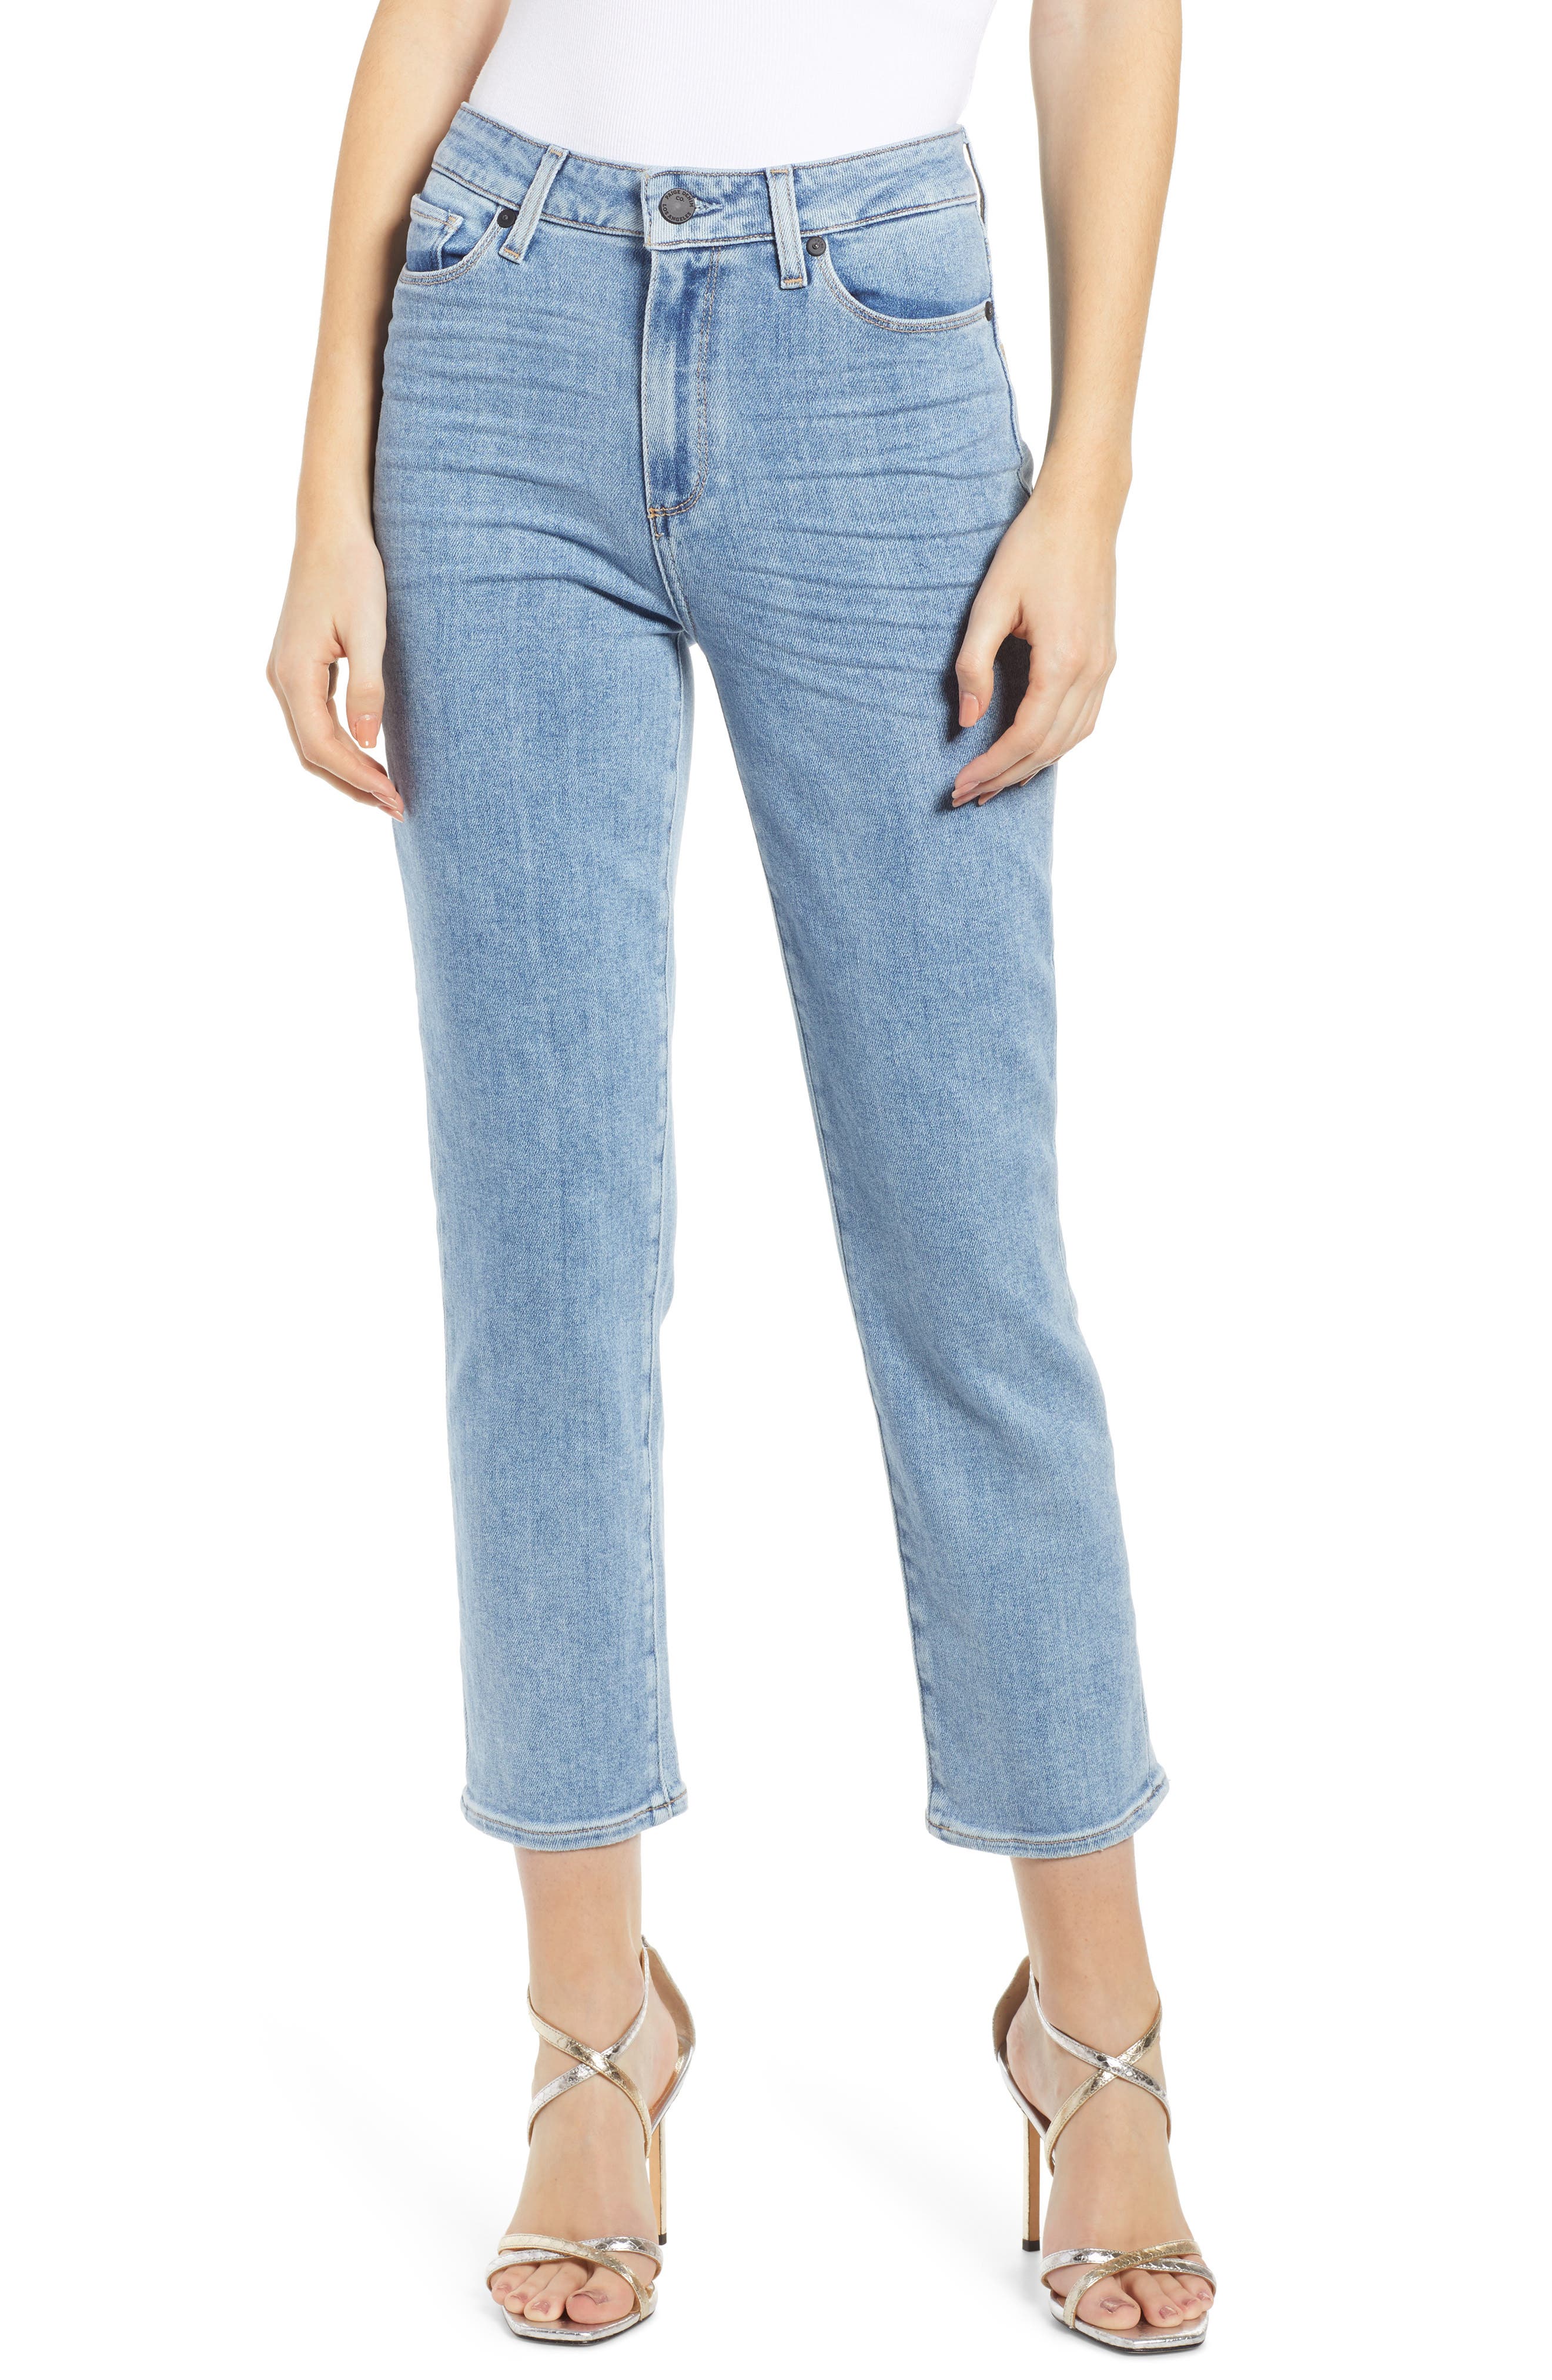 hoxton straight ankle jeans